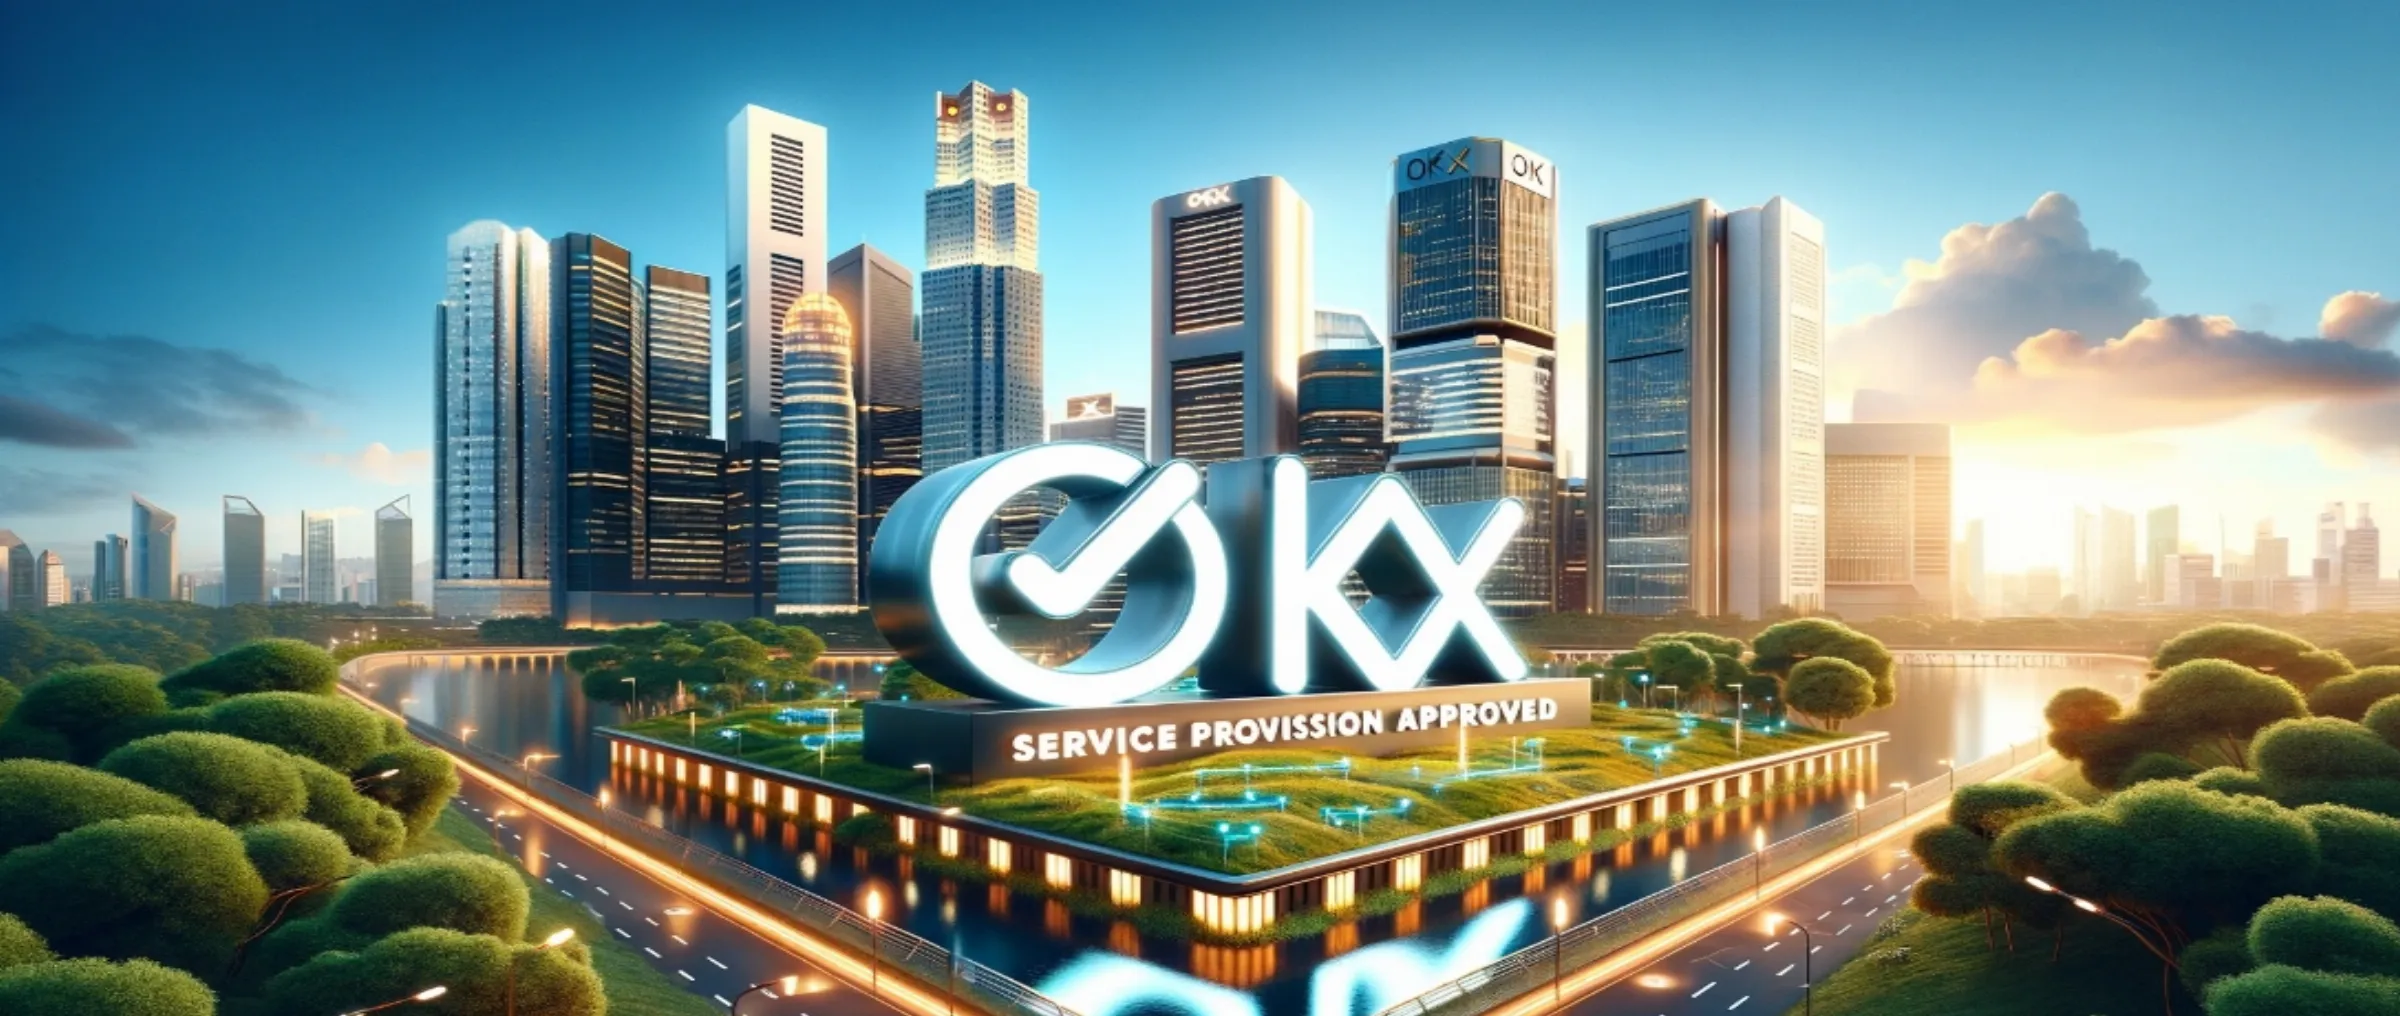 OKX has received permission to provide services in Singapore